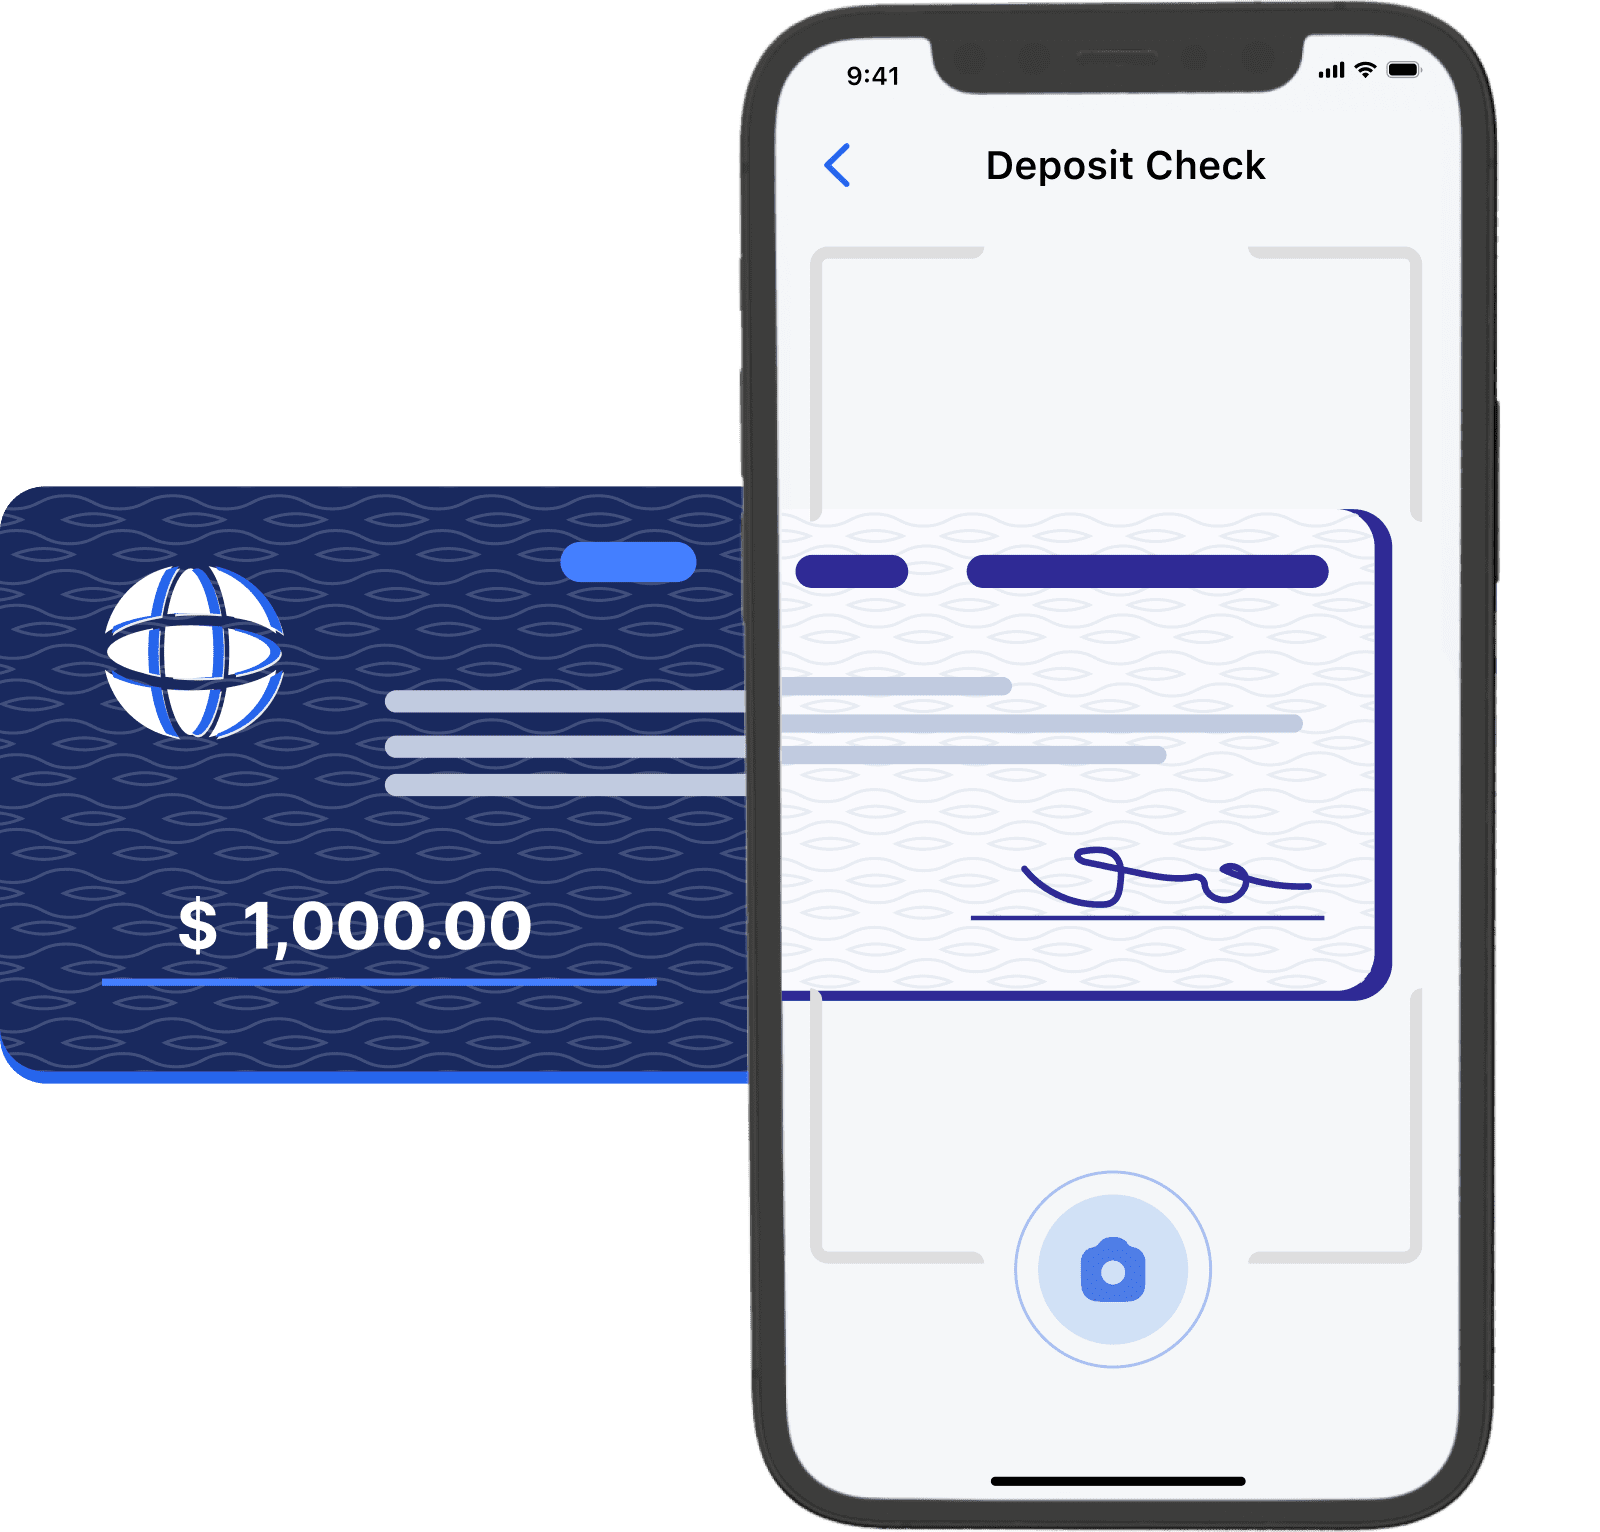 Account payments deposit check app image